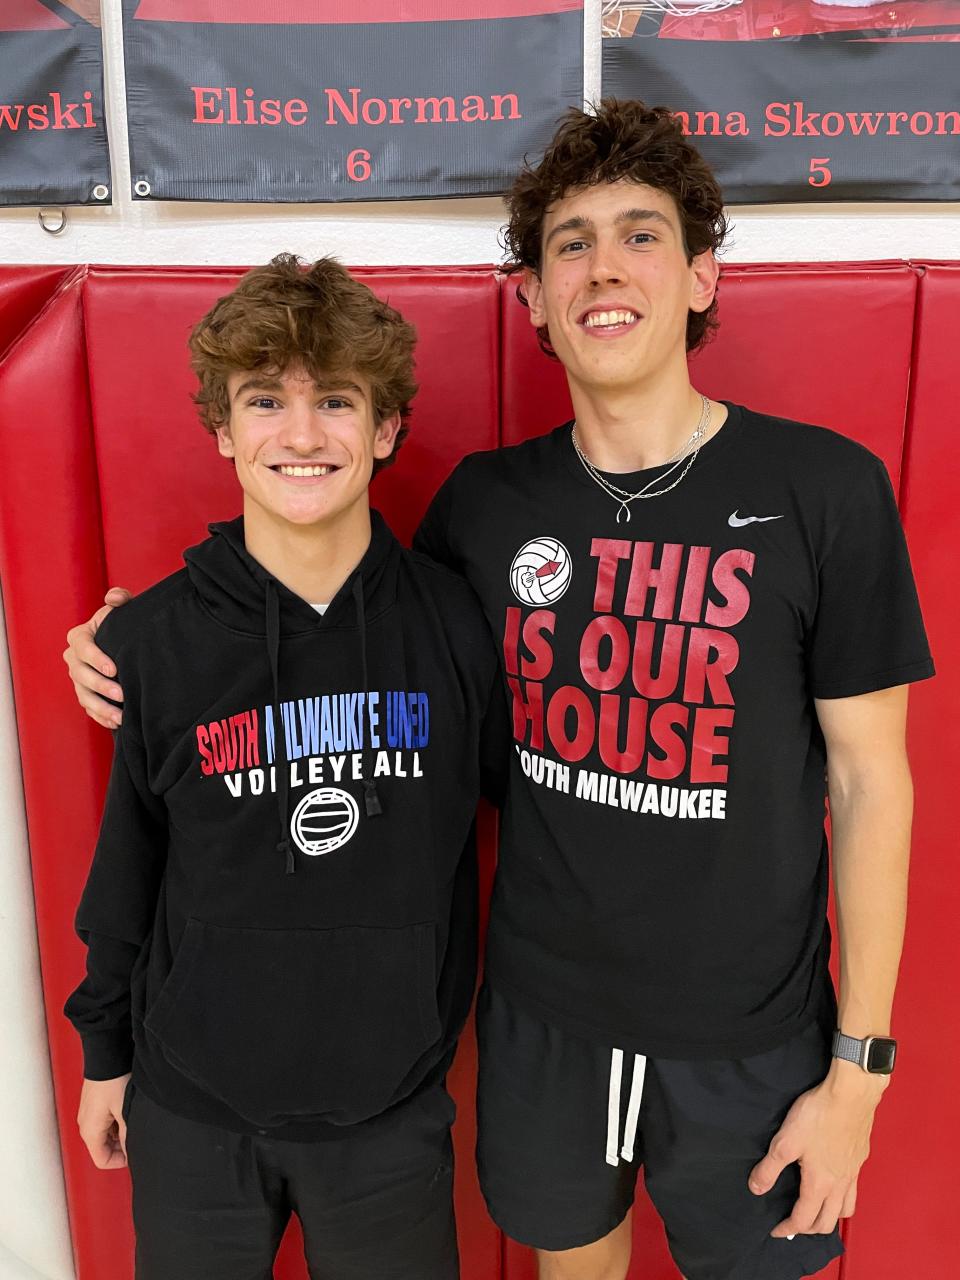 Ethan Jetzer, left, helped create the South Milwaukee United boys volleyball team in 2022 along with his coach, Tyler Cicigoi. Now, Jetzer is one of the state's top players.